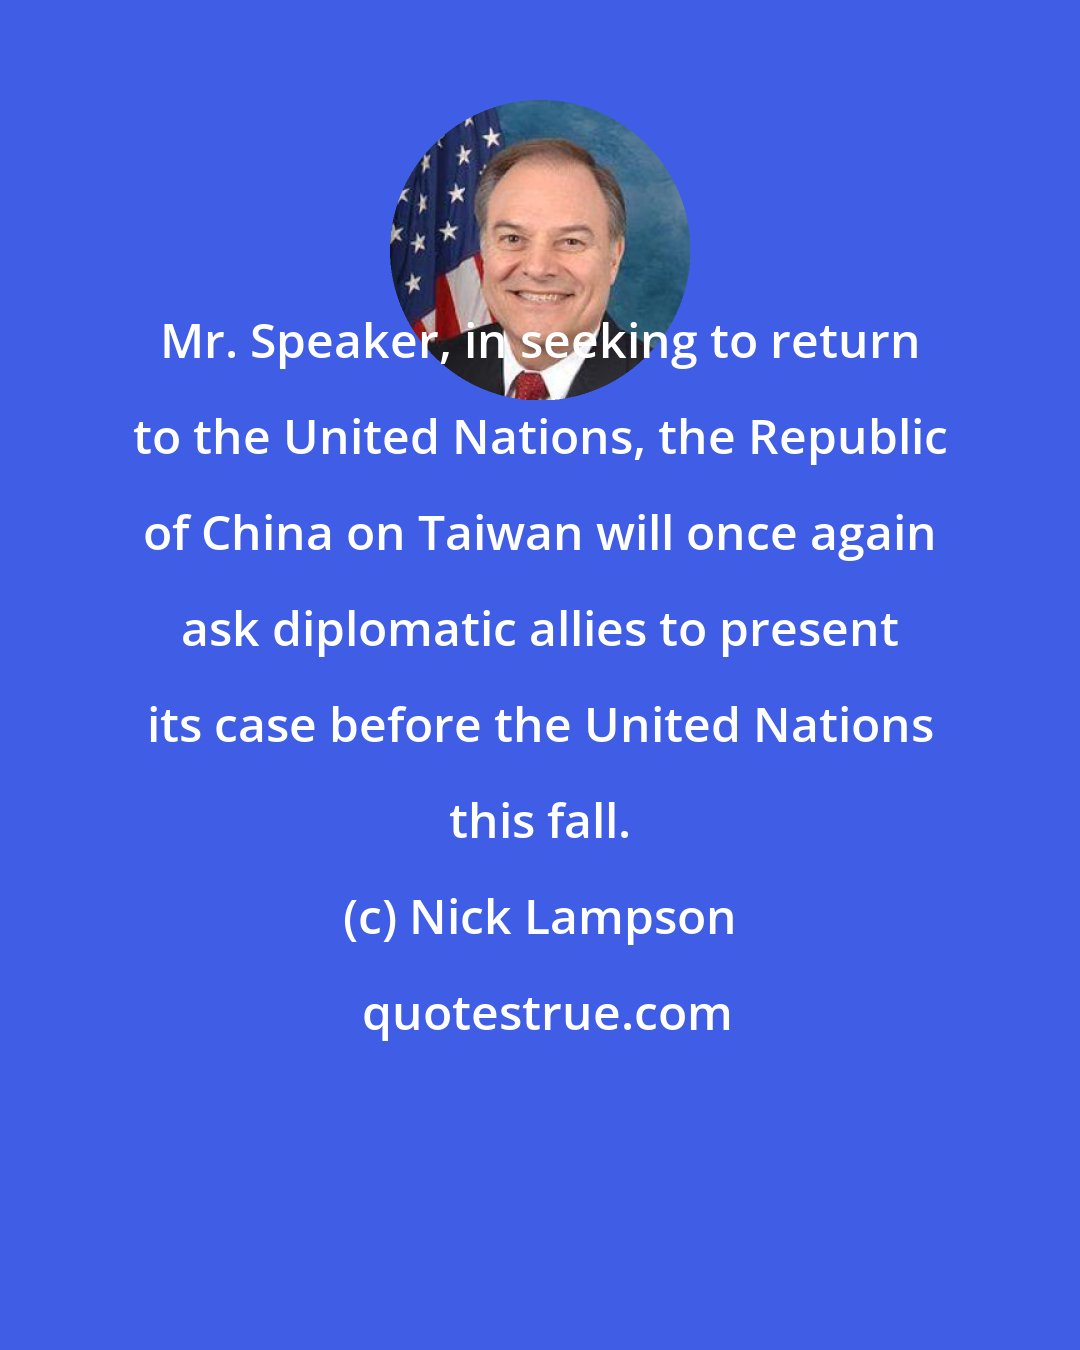 Nick Lampson: Mr. Speaker, in seeking to return to the United Nations, the Republic of China on Taiwan will once again ask diplomatic allies to present its case before the United Nations this fall.